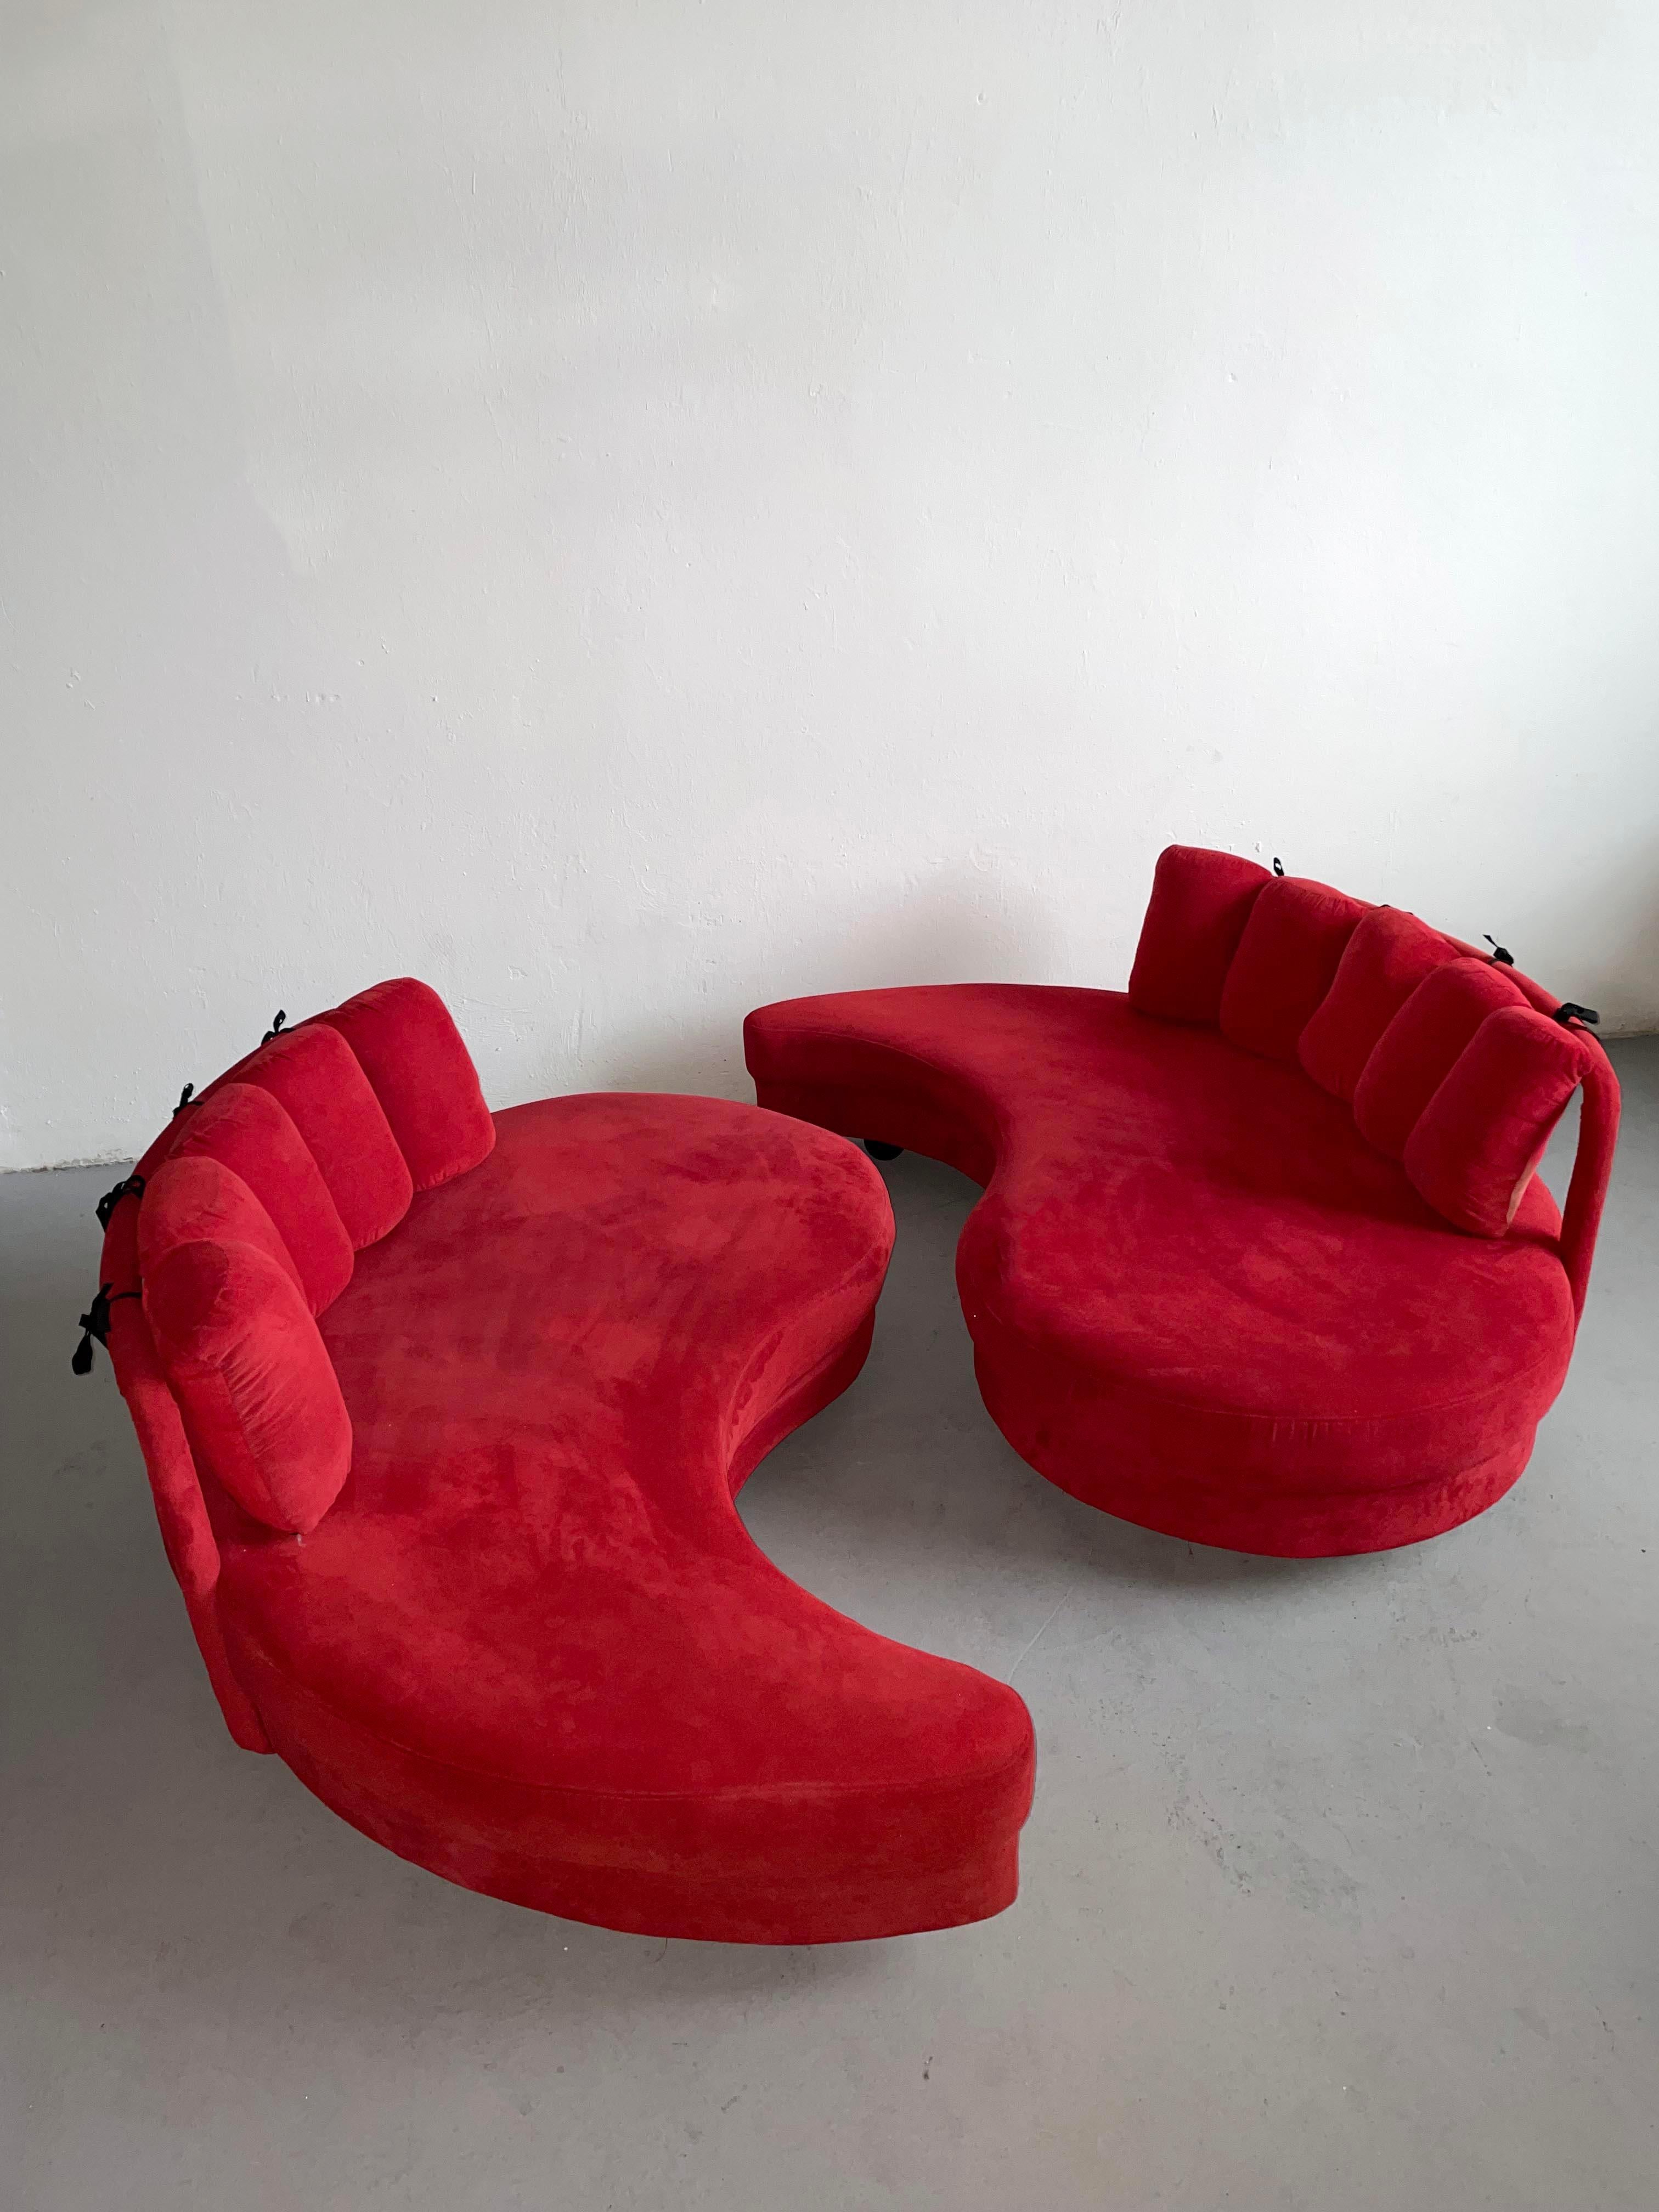 Set of 2 Postmodern Curved Yin-Yang Shaped Sofa Daybeds in Red Fabric, c 1980s For Sale 7